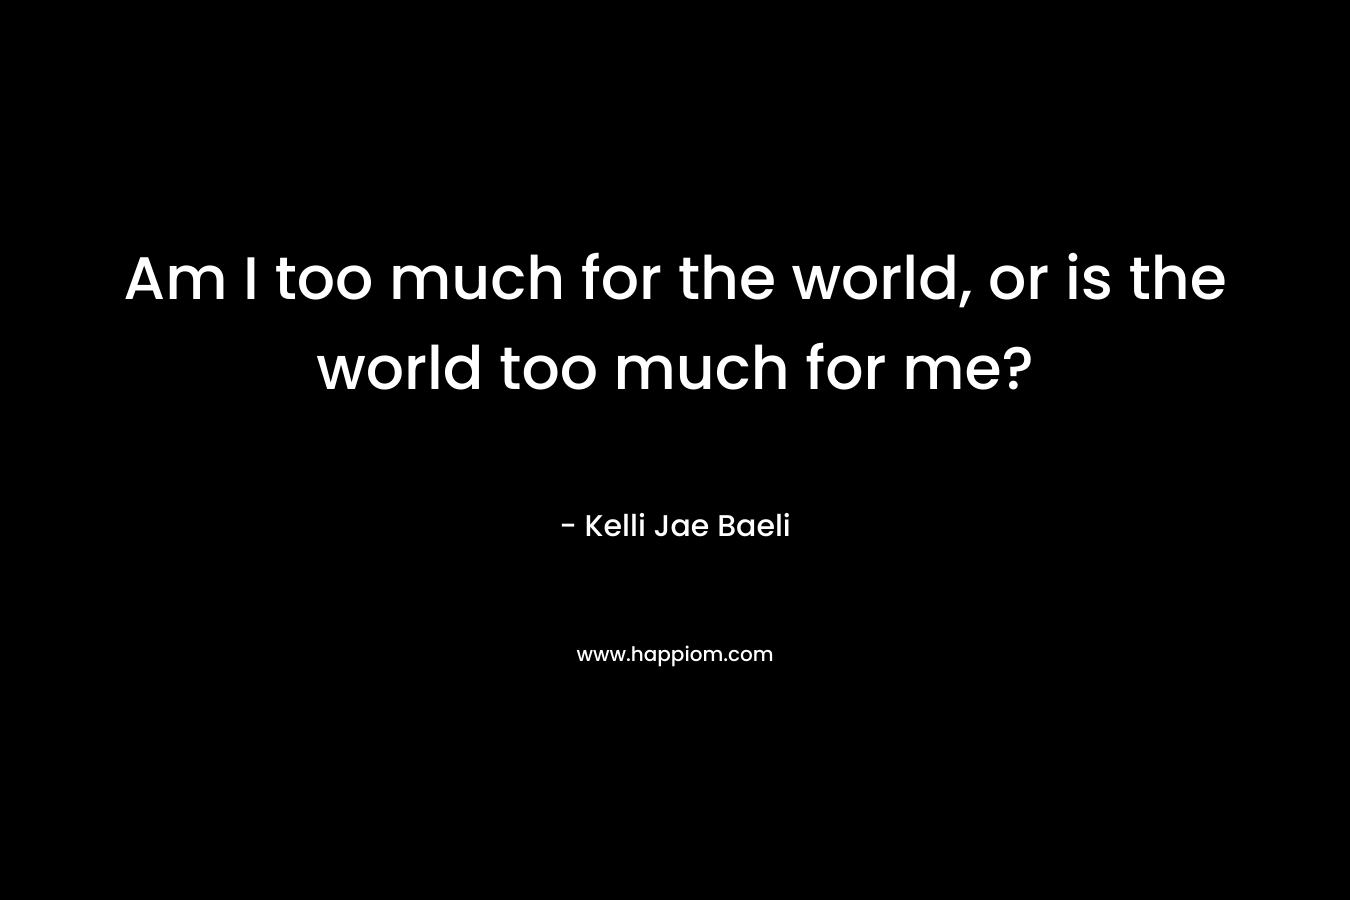 Am I too much for the world, or is the world too much for me?